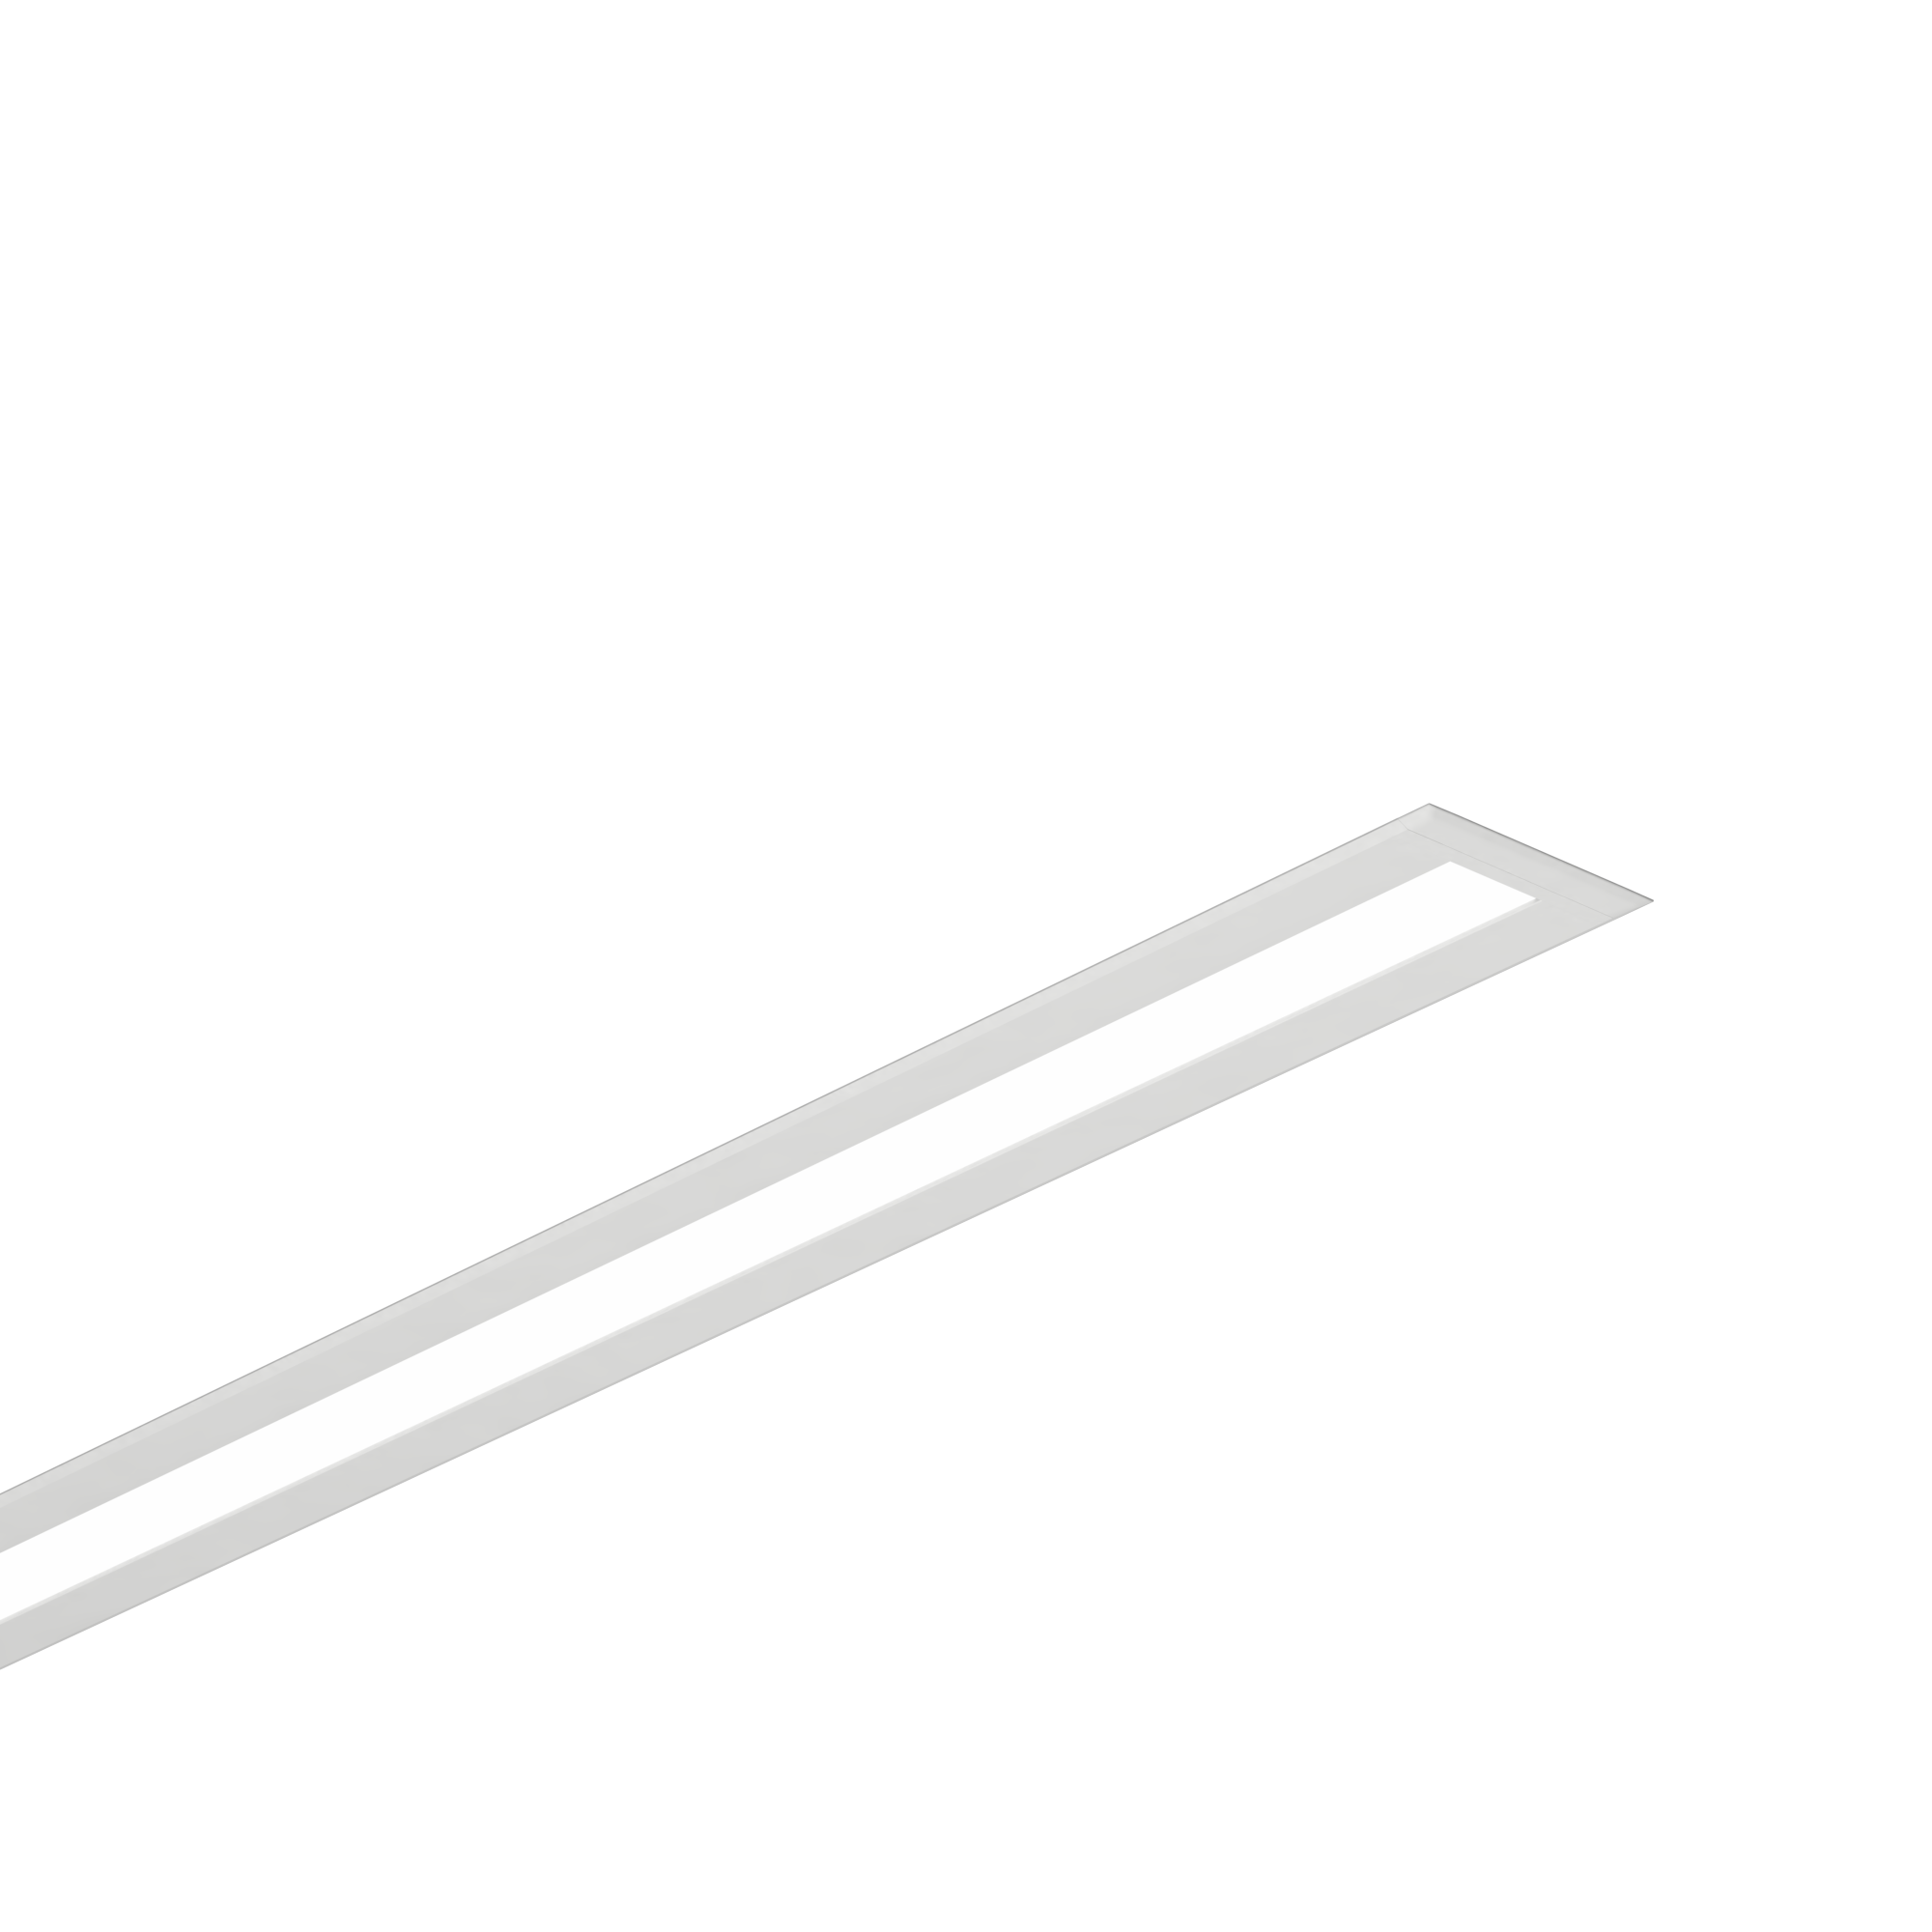 0.95” Ultra-Compact Slot LED Linear for Drywall Applications
NANOSlot Recessed is 0.95” recessed slot LED linear light fixture, bringing SmartBeam® capabilities to a graphic scale that complements architectural space. NANOSlot has mounting options for ceiling systems, drywall, millwork, metal, and custom configurations. The NANOSlot 0.95 range is designed to be specification-grade with high lumen per foot, high CRI, and circadian options.